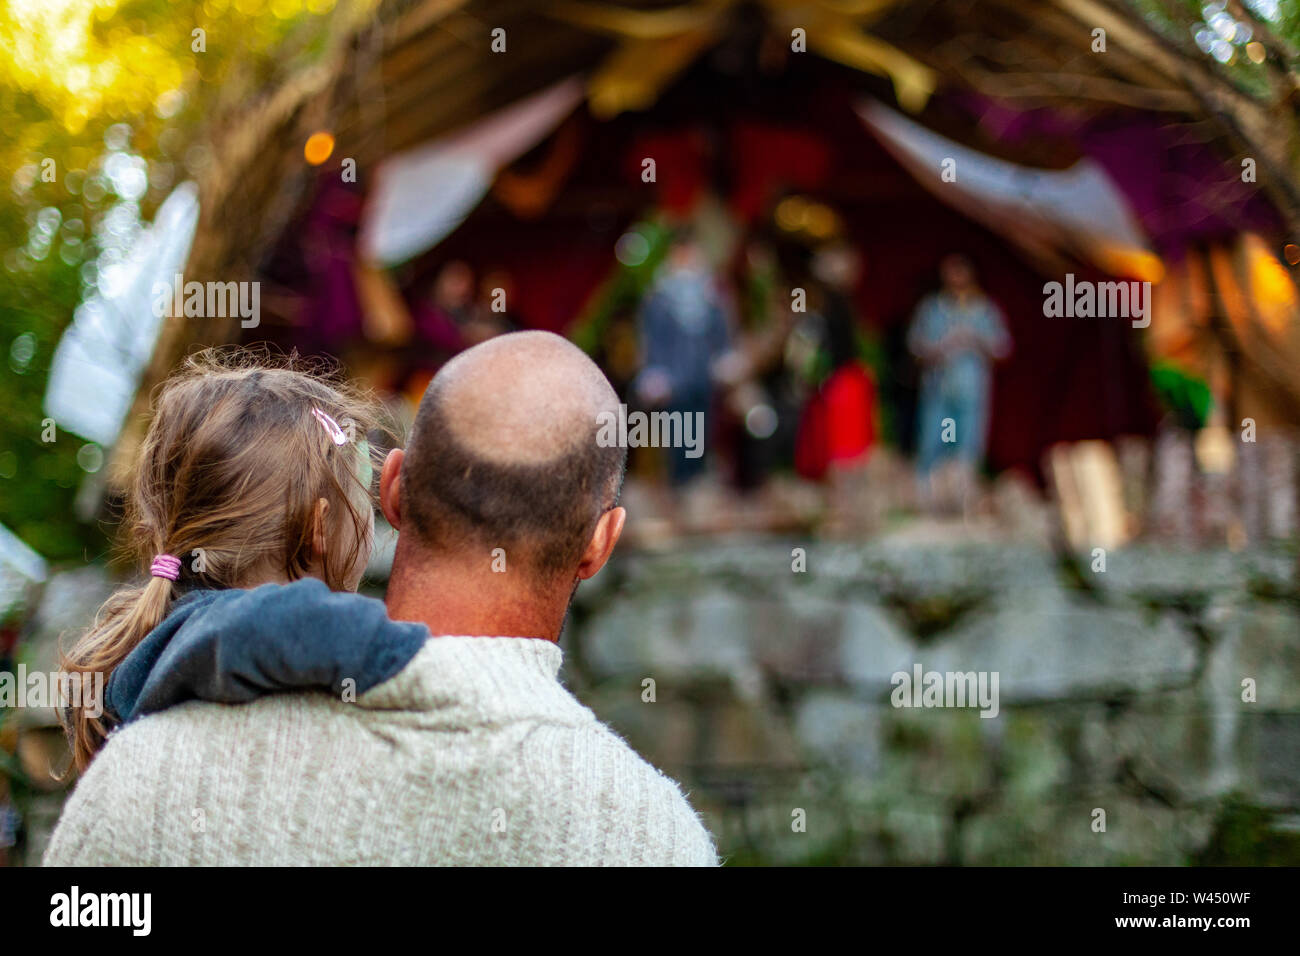 A bald headed father is viewed from behind, holding his his little girl as they watch a live band perform at a family music festival, with copy space. Stock Photo